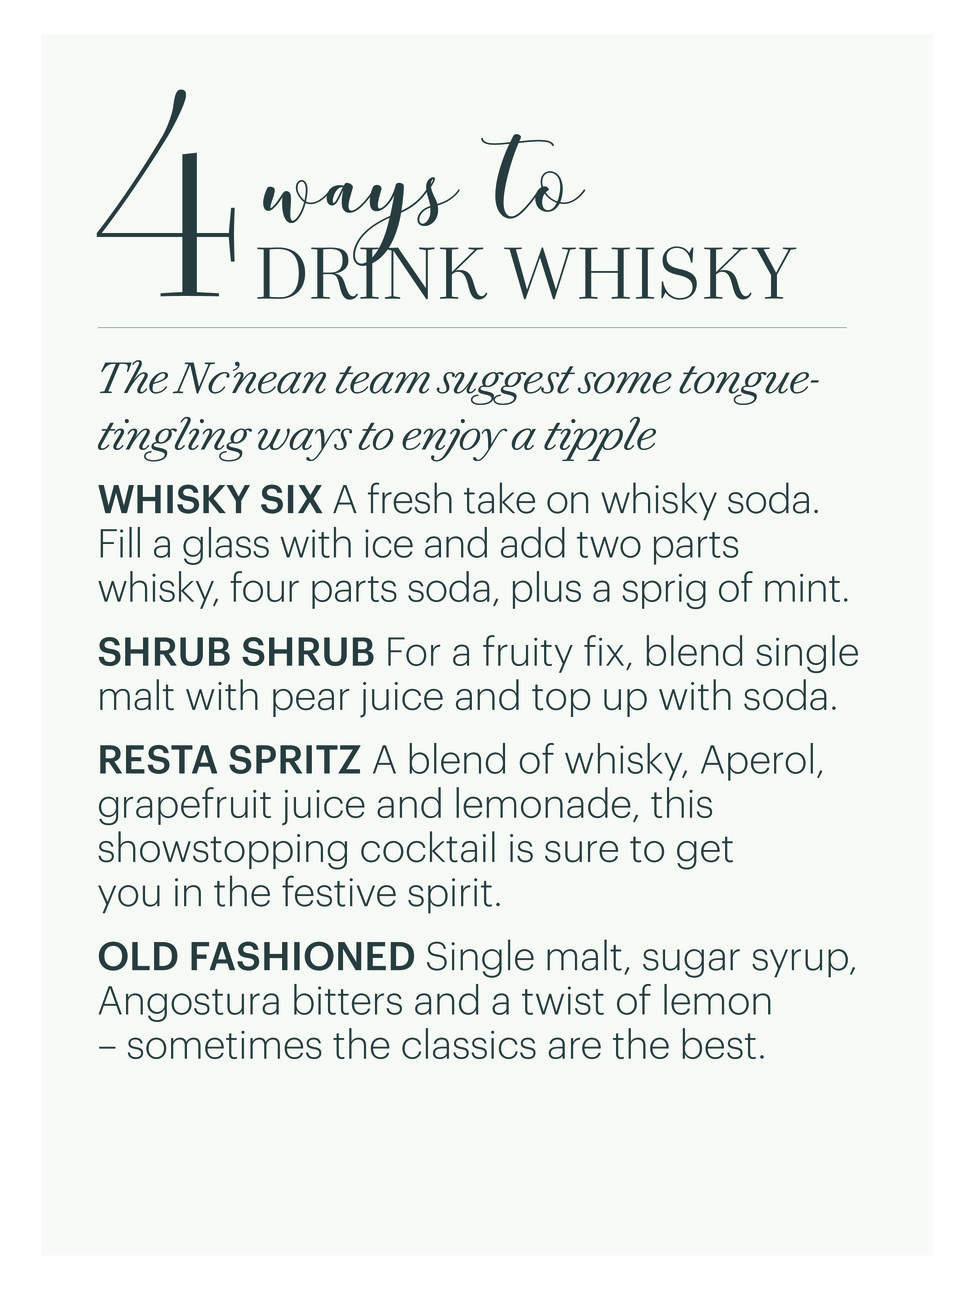 whisky ways to drink box